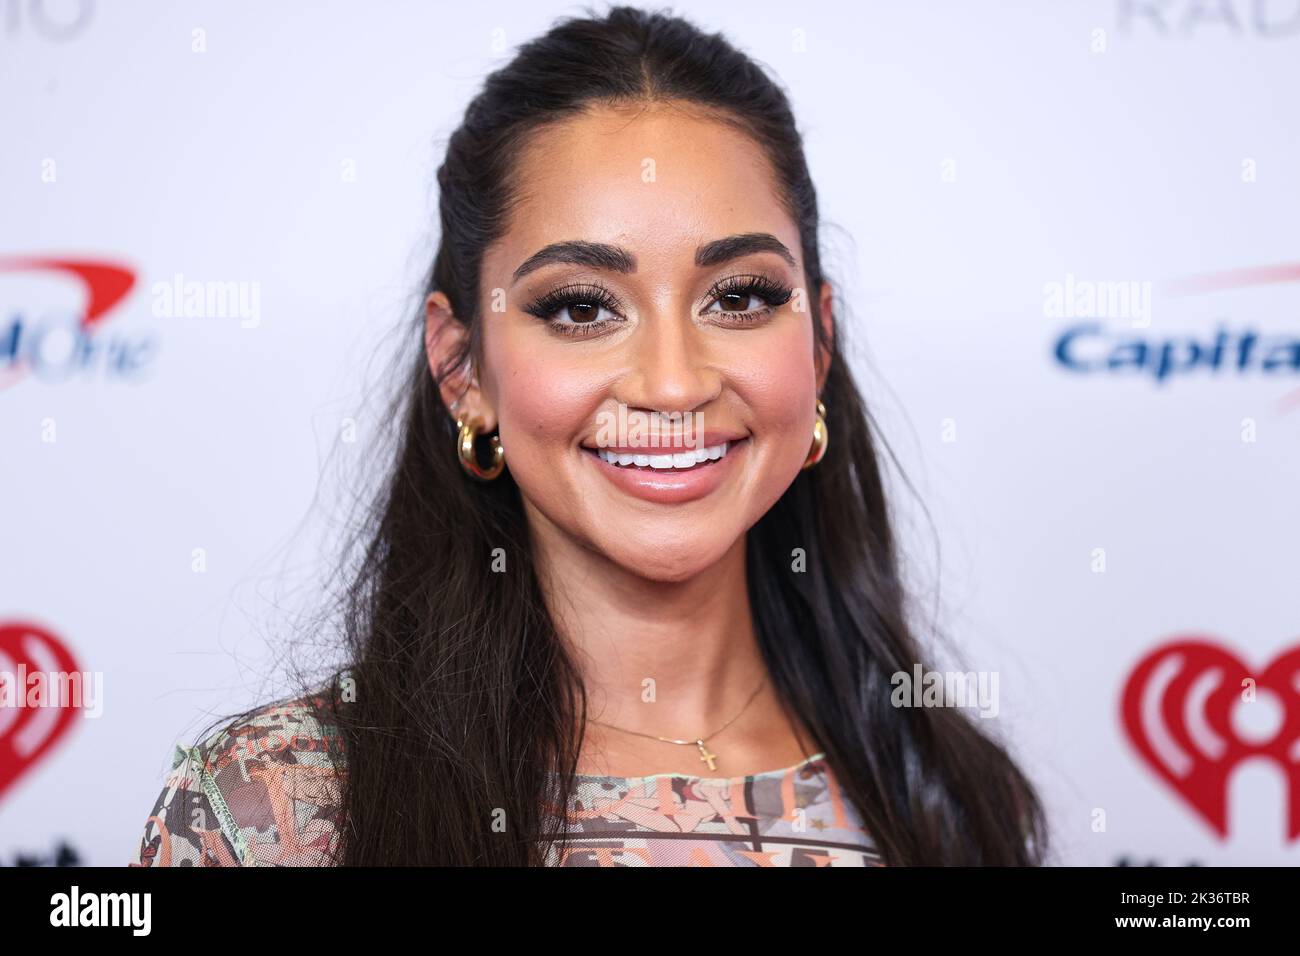 Las Vegas, United States. 24th Sep, 2022. LAS VEGAS, NEVADA, USA - SEPTEMBER 24: Victoria Fuller poses in the press room at the 2022 iHeartRadio Music Festival - Night 2 held at the T-Mobile Arena on September 24, 2022 in Las Vegas, Nevada, United States. (Photo by Xavier Collin/Image Press Agency) Credit: Image Press Agency/Alamy Live News Stock Photo